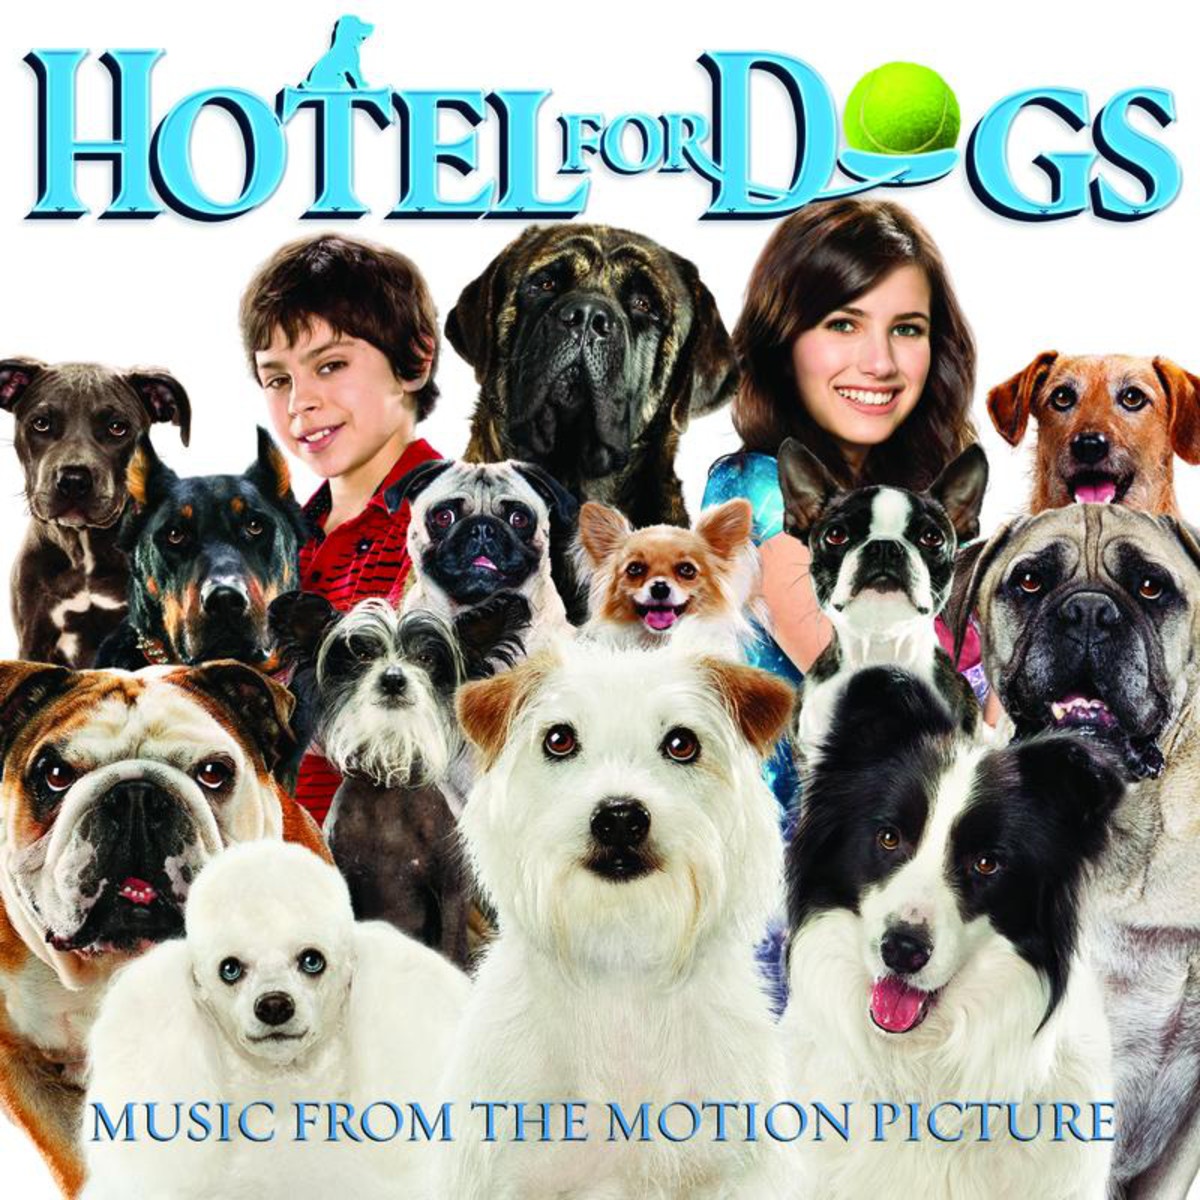 Hotel For Dogs (Music from the Motion Picture)